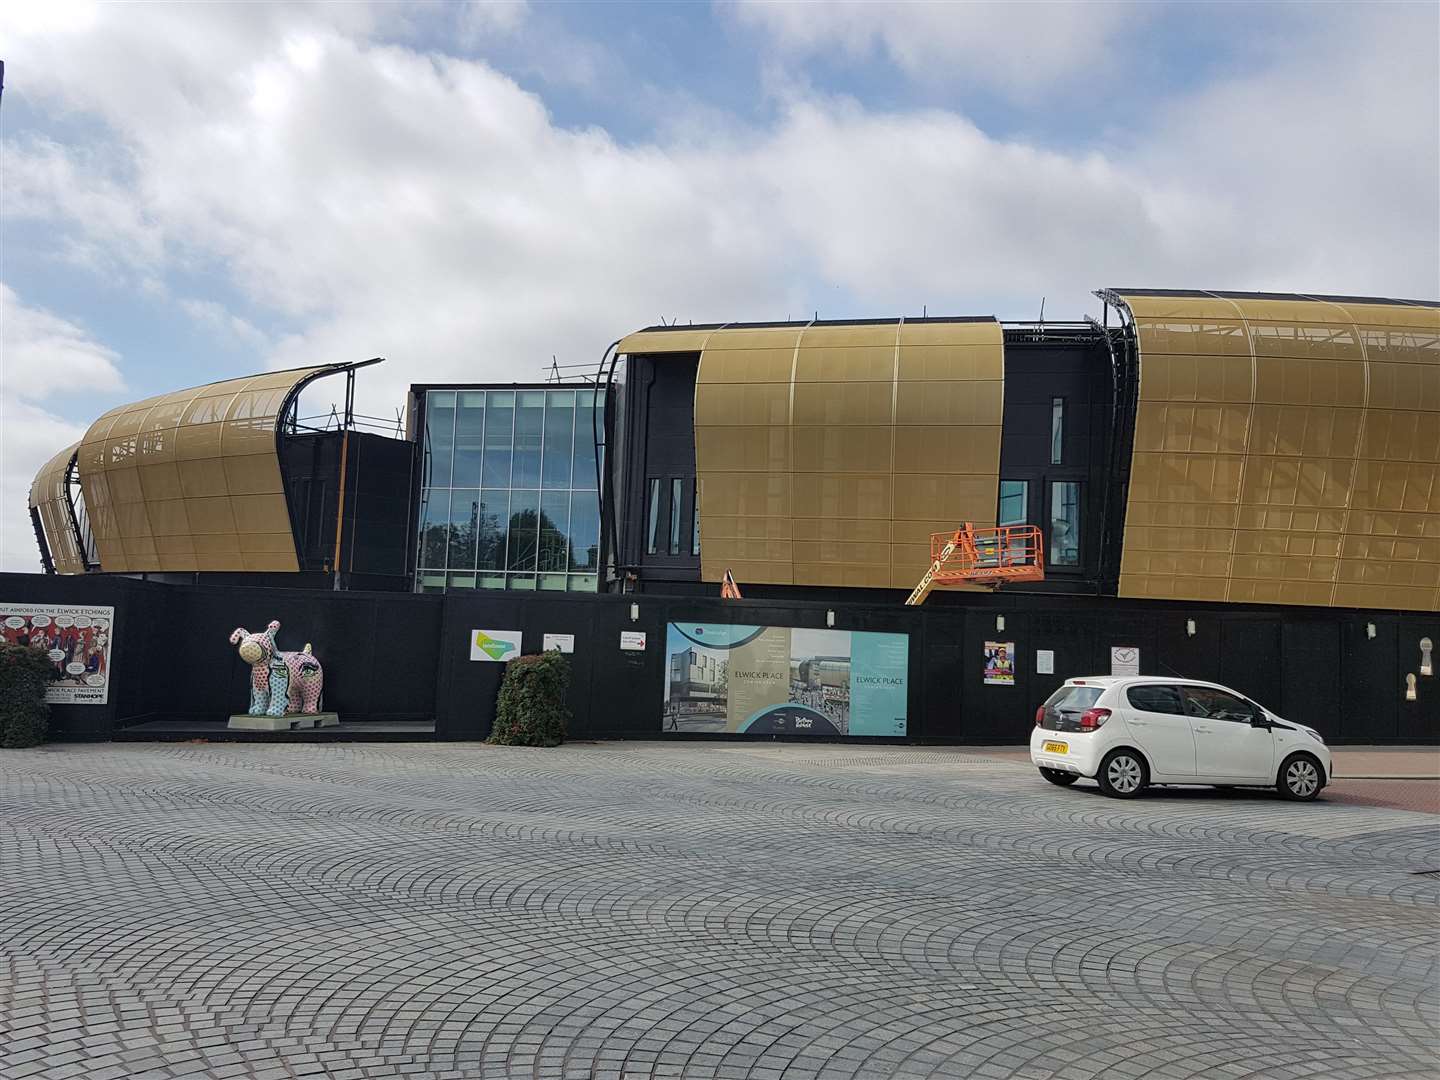 Elwick Place's golden frontage has been completely installed ahead of the December launch